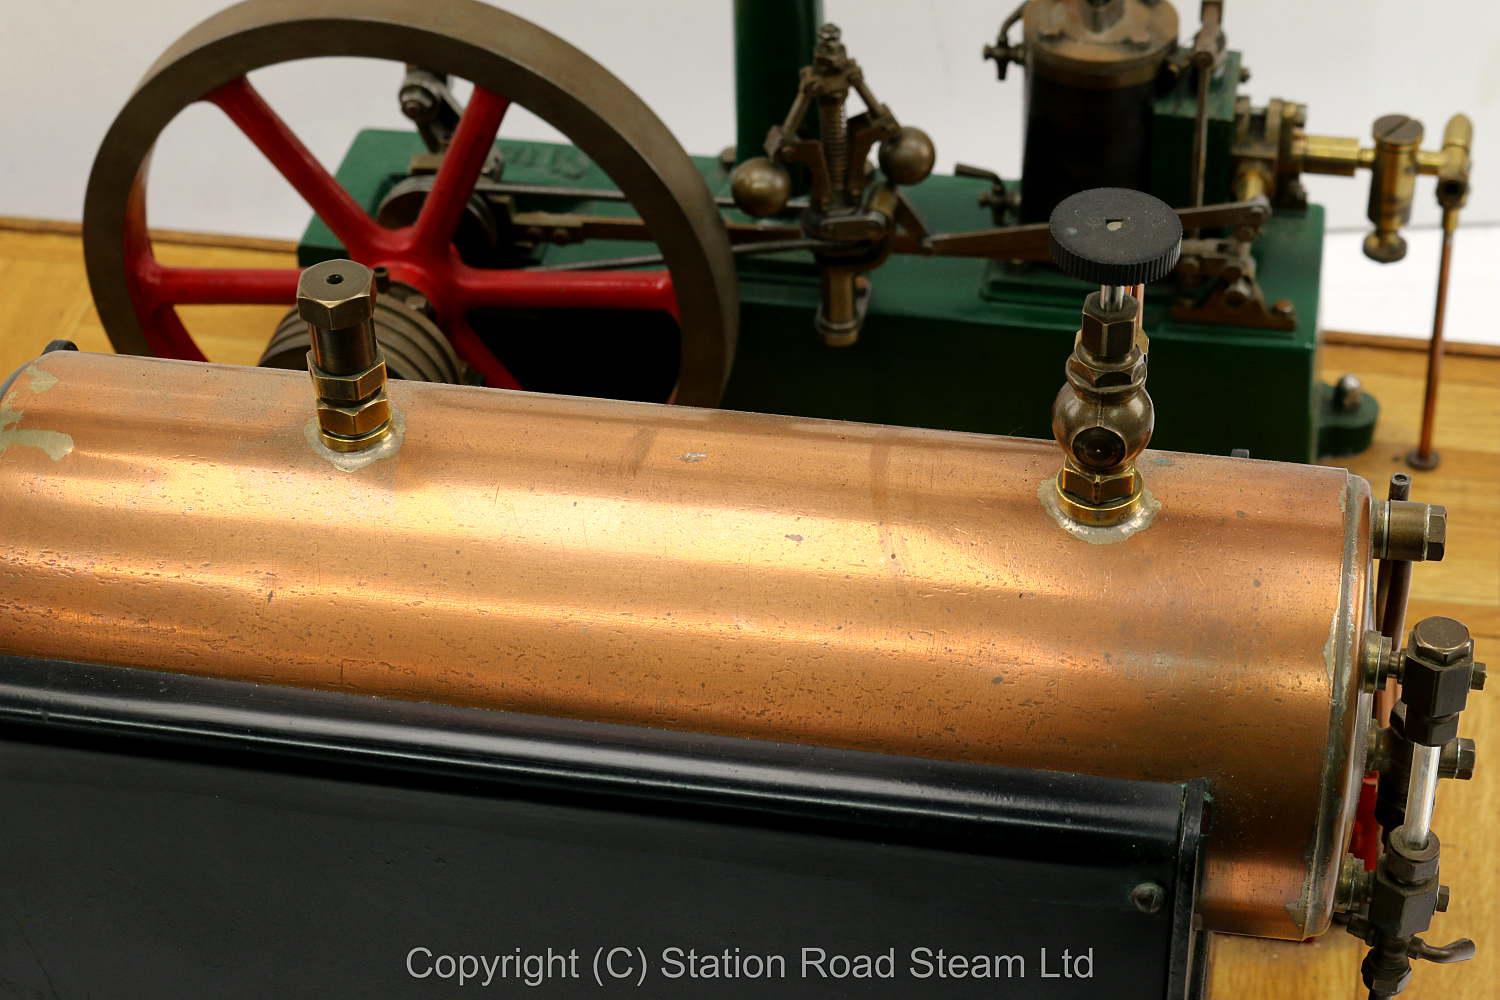 Stuart 504 boiler with beam engine, water tank and hand pump